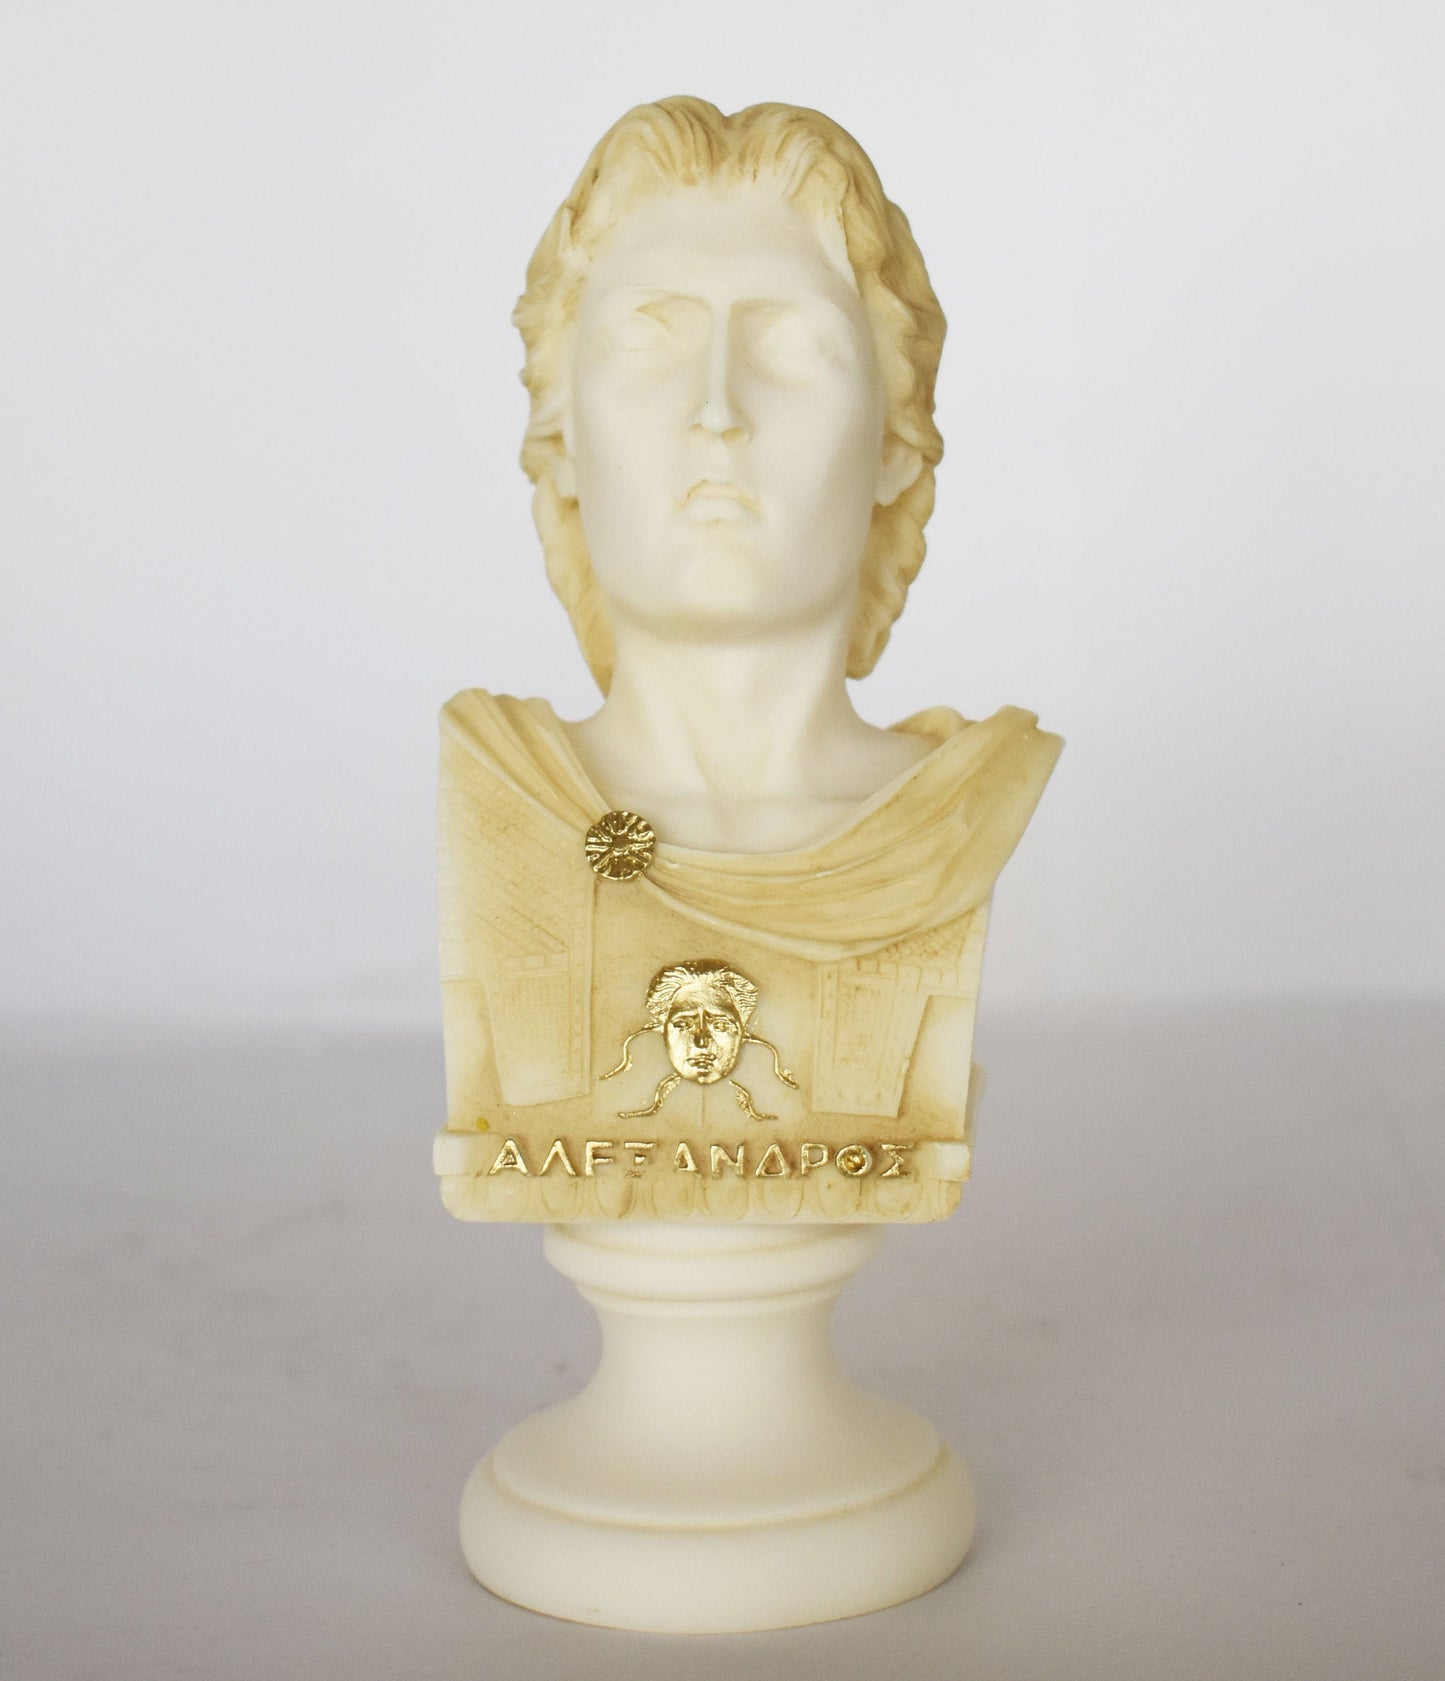 Alexander the Great - Ancient Greece - King of Macedonia - Son of Philip - Alabaster Bust